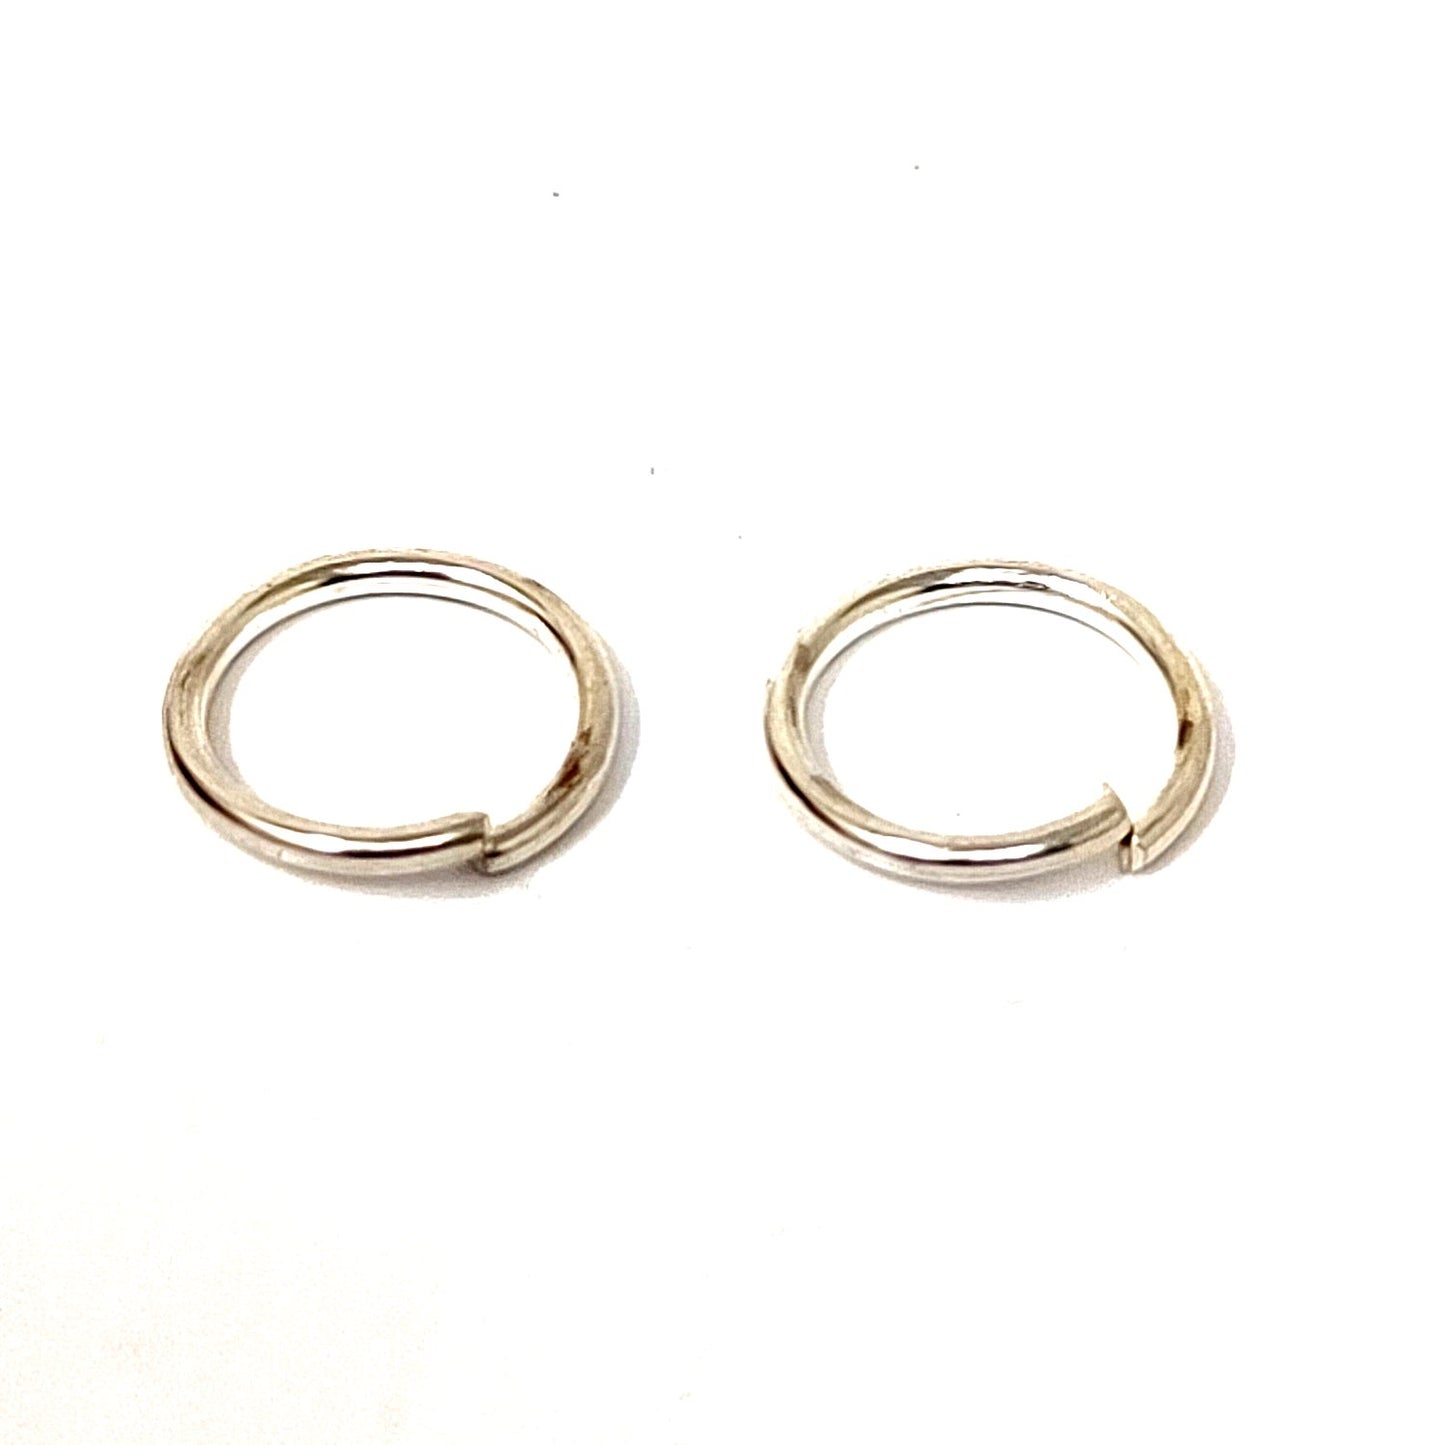 6mm Silver Jump Rings for Making Earrings and Jewellery (100 Pcs) - 96-24